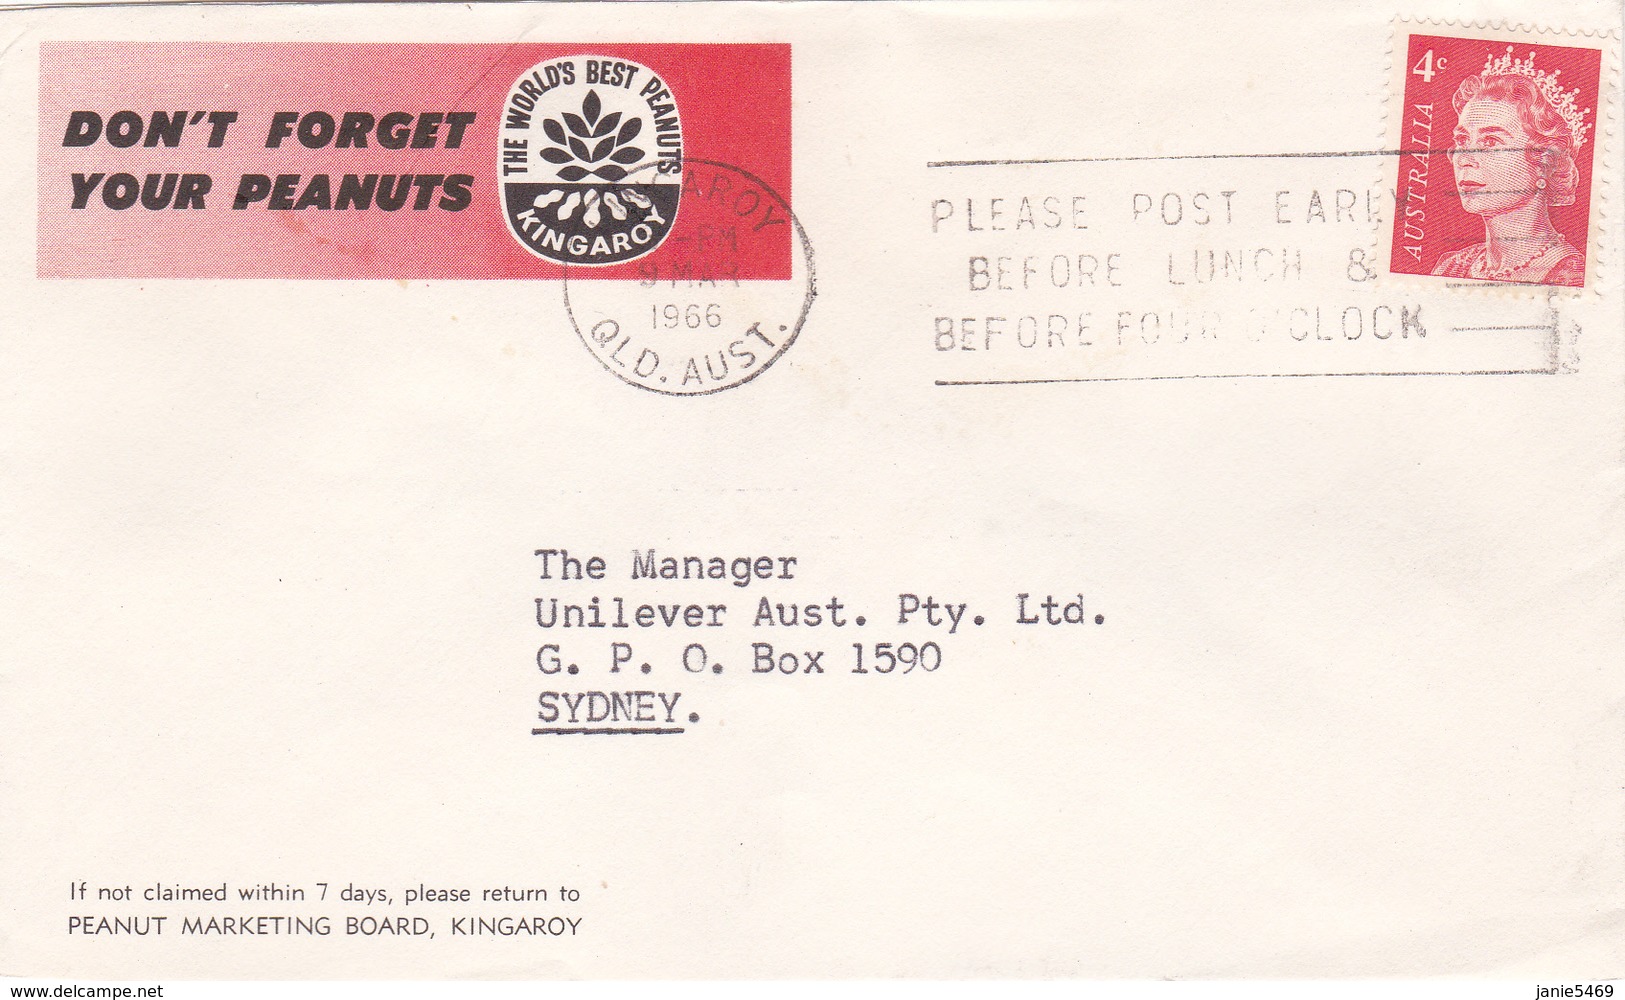 Australia 1966 Cover With PLEASE POST EARLY BEFORE LUNCH - Usati